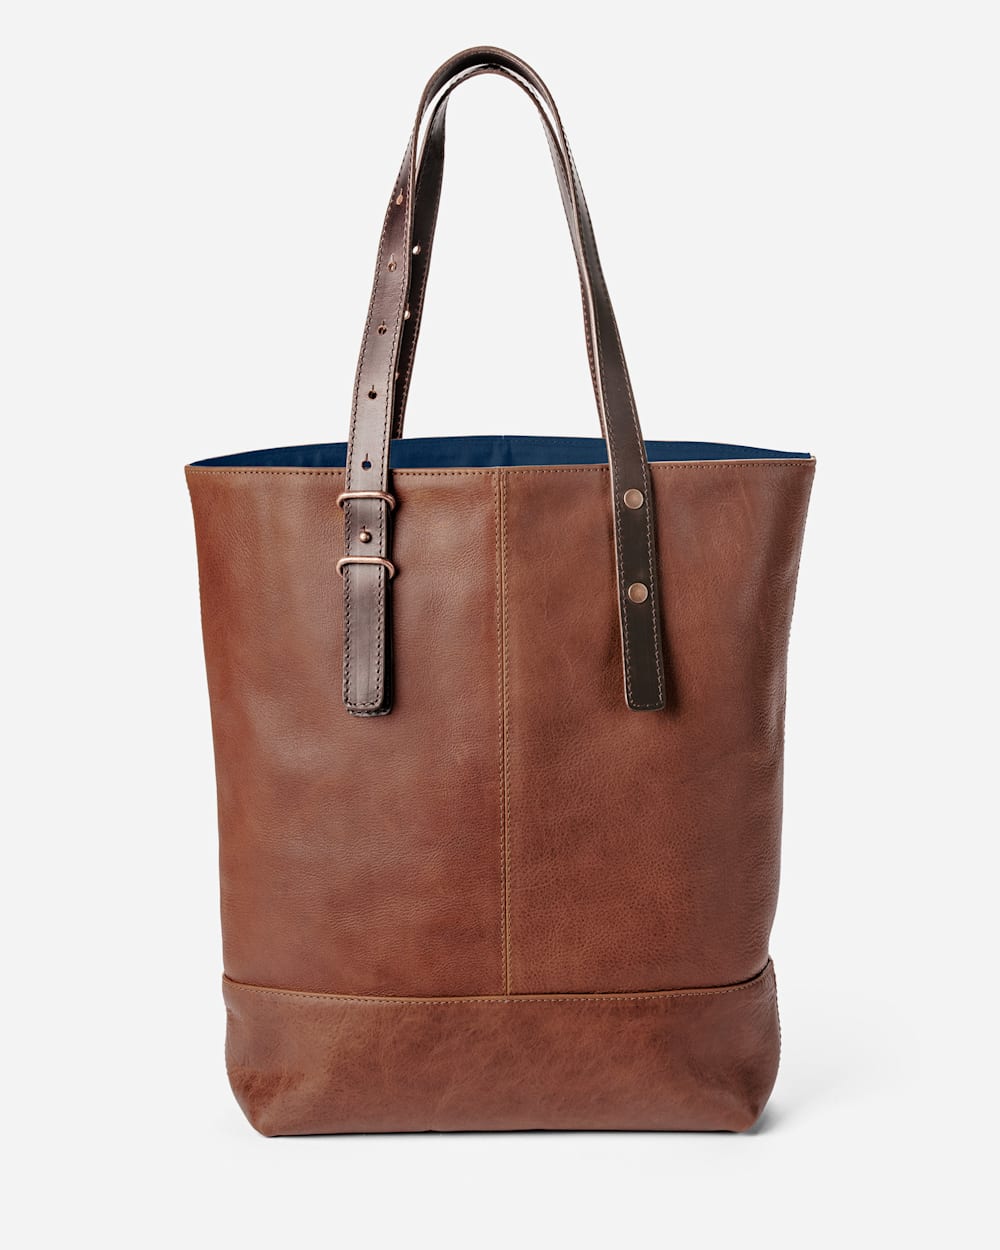 ADDITIONAL VIEW OF WYETH TRAIL OPEN TOTE IN IVORY image number 3